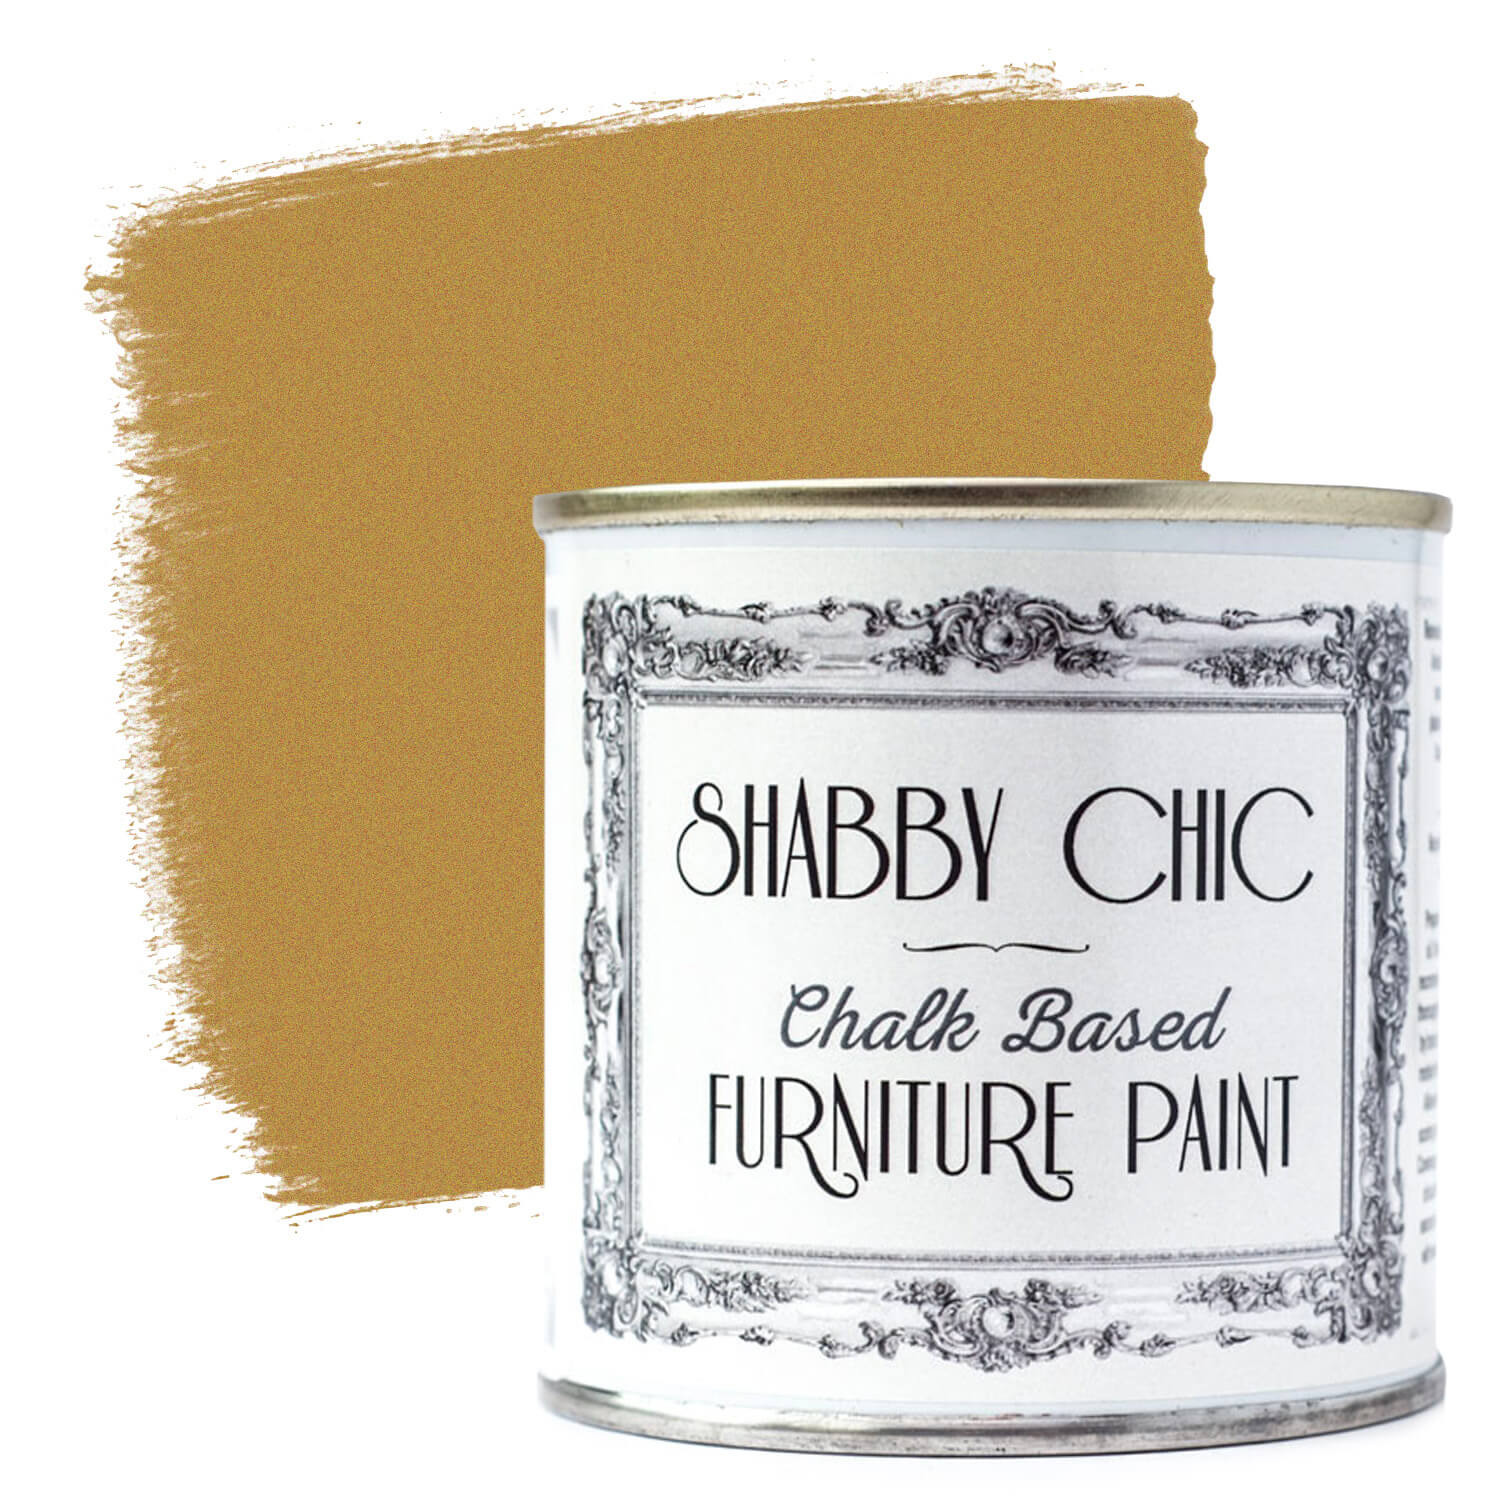 Antique Gold Shabby Chic Furniture Paint - The Liquid Chalk